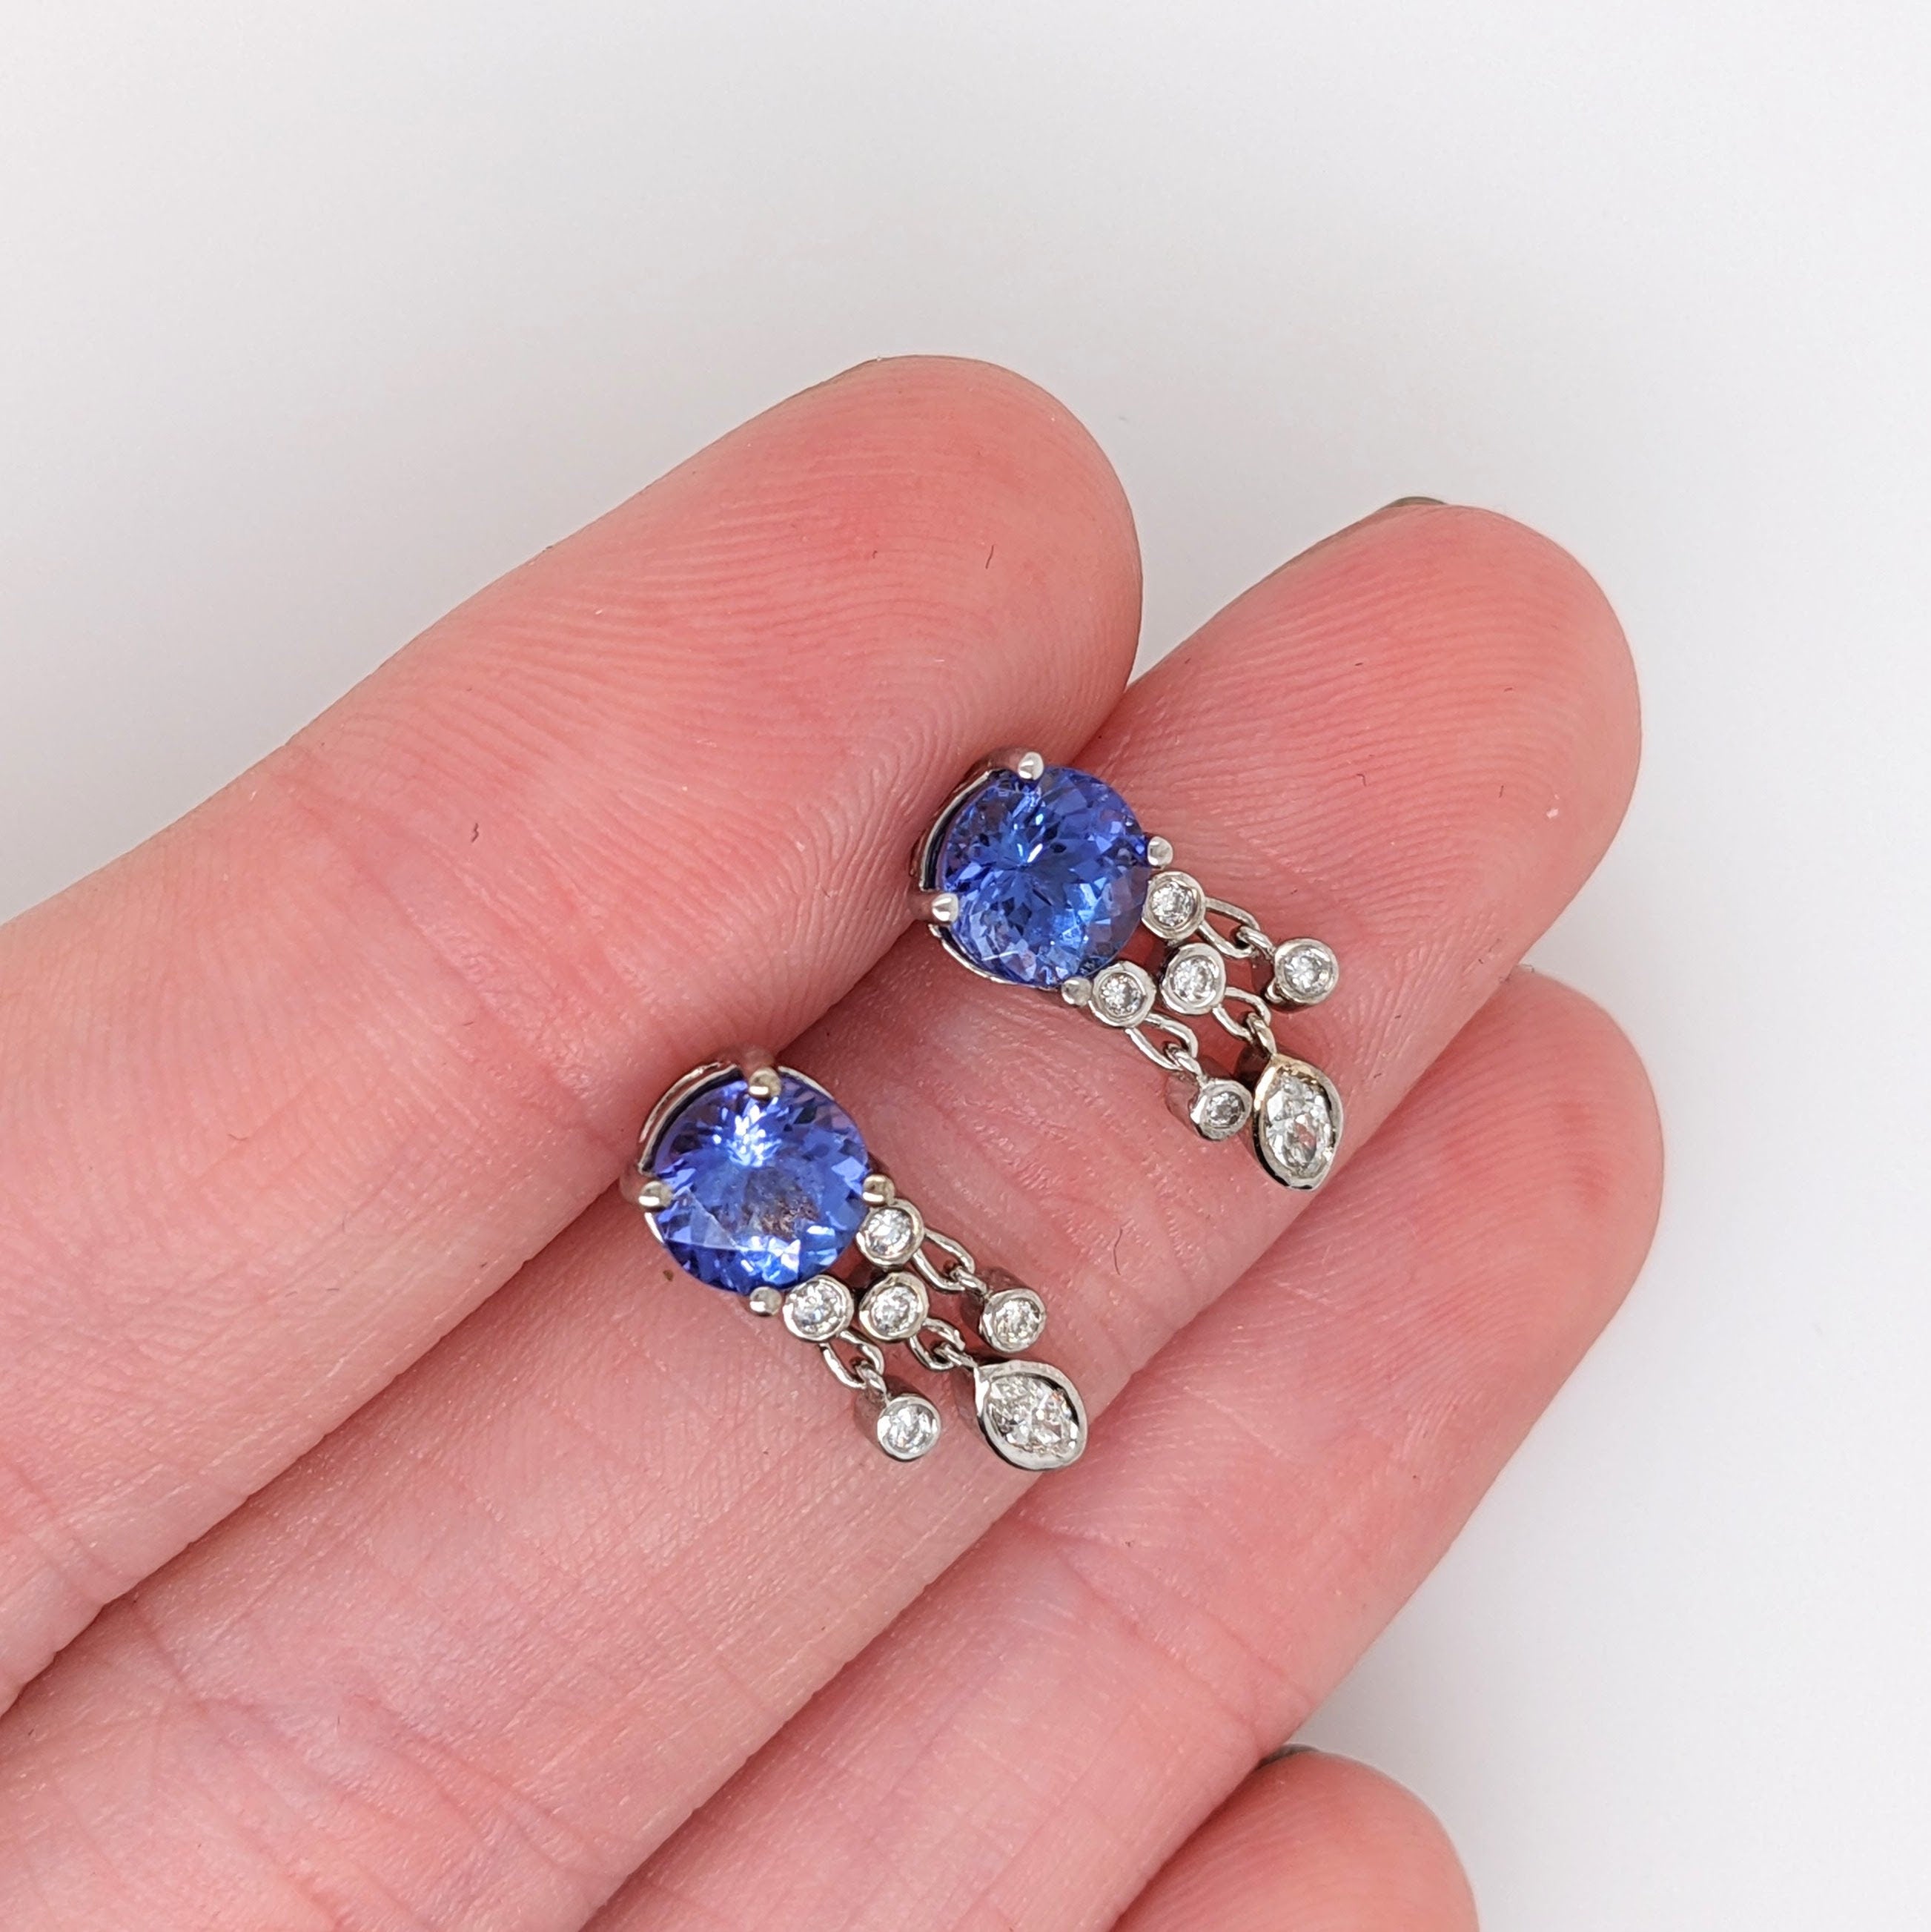 Tanzanite Dangly Earrings in 14K Gold w Natural Diamond Accents | Drop Earrings | Round 6mm | Friction Back | Blue Gems | Something Blue